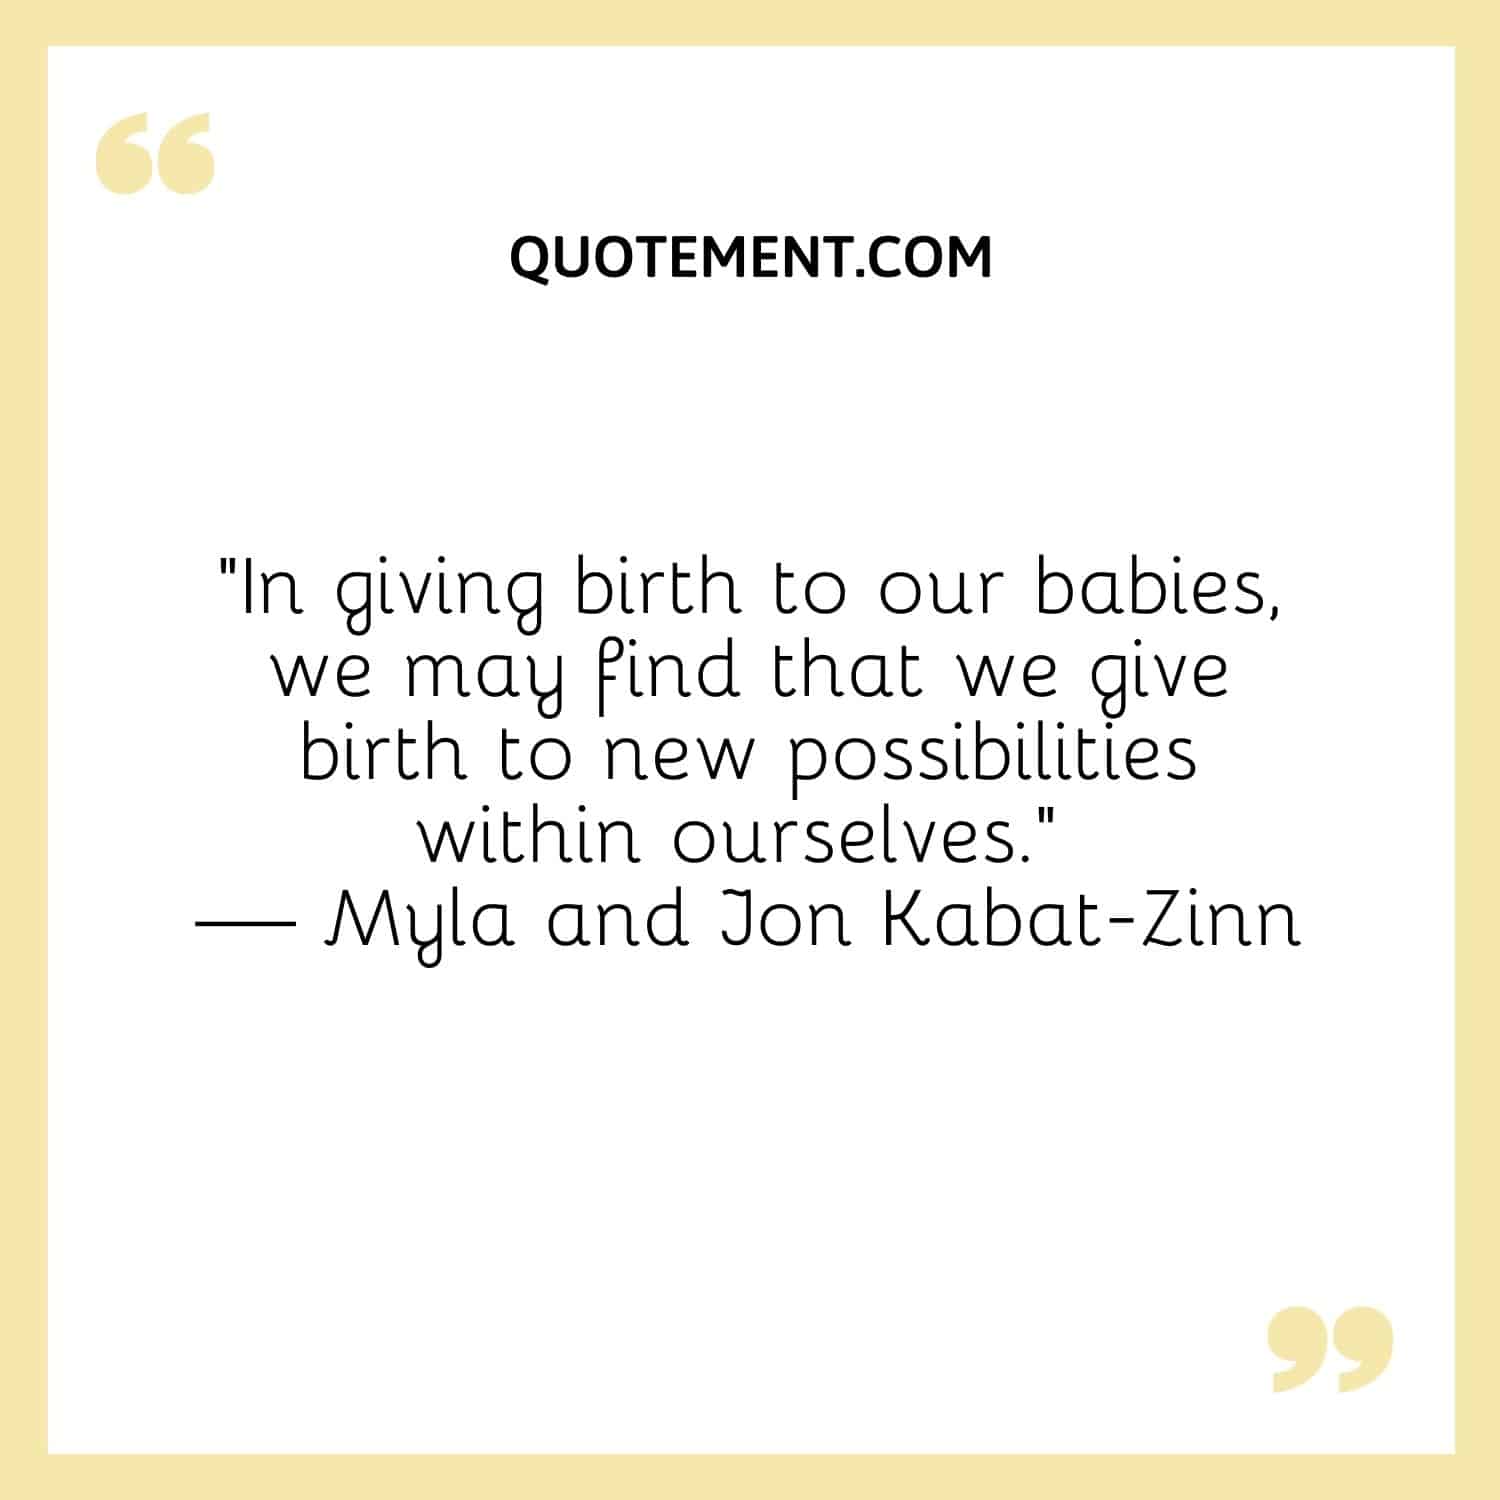 In giving birth to our babies, we may find that we give birth to new possibilities within ourselves.